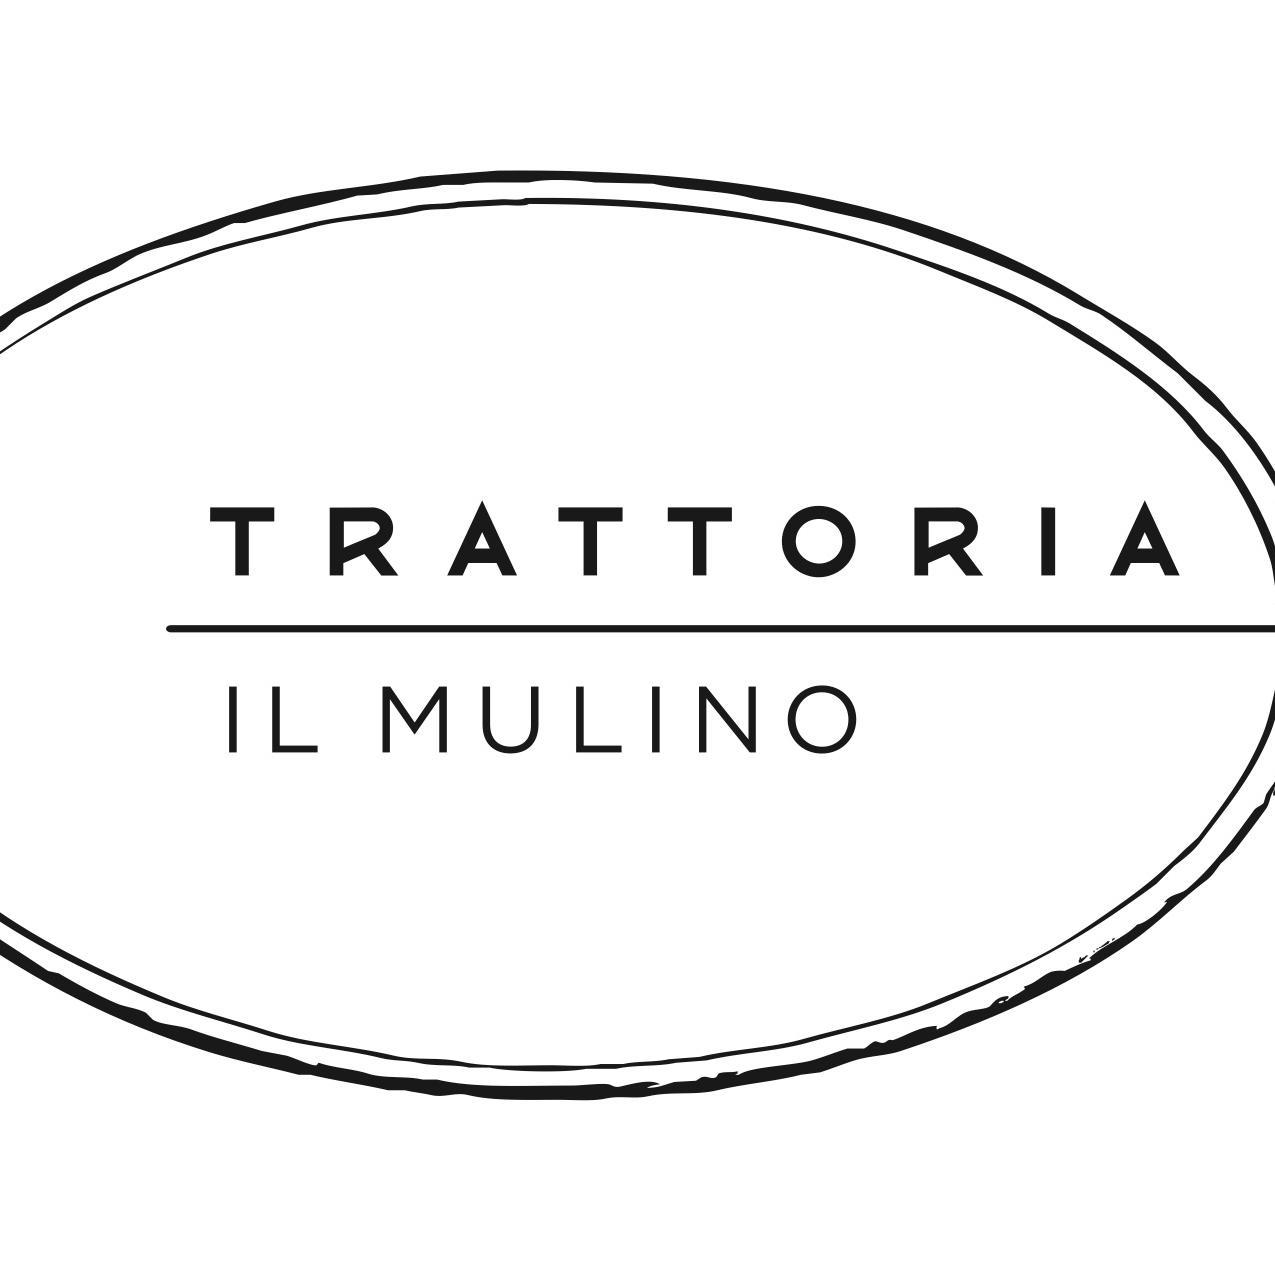 Enjoy authentic Italian at Hilton Nashville Downtown. Abruzzese-inspired dishes are served with Southern flair at Trattoria Il Mulino.